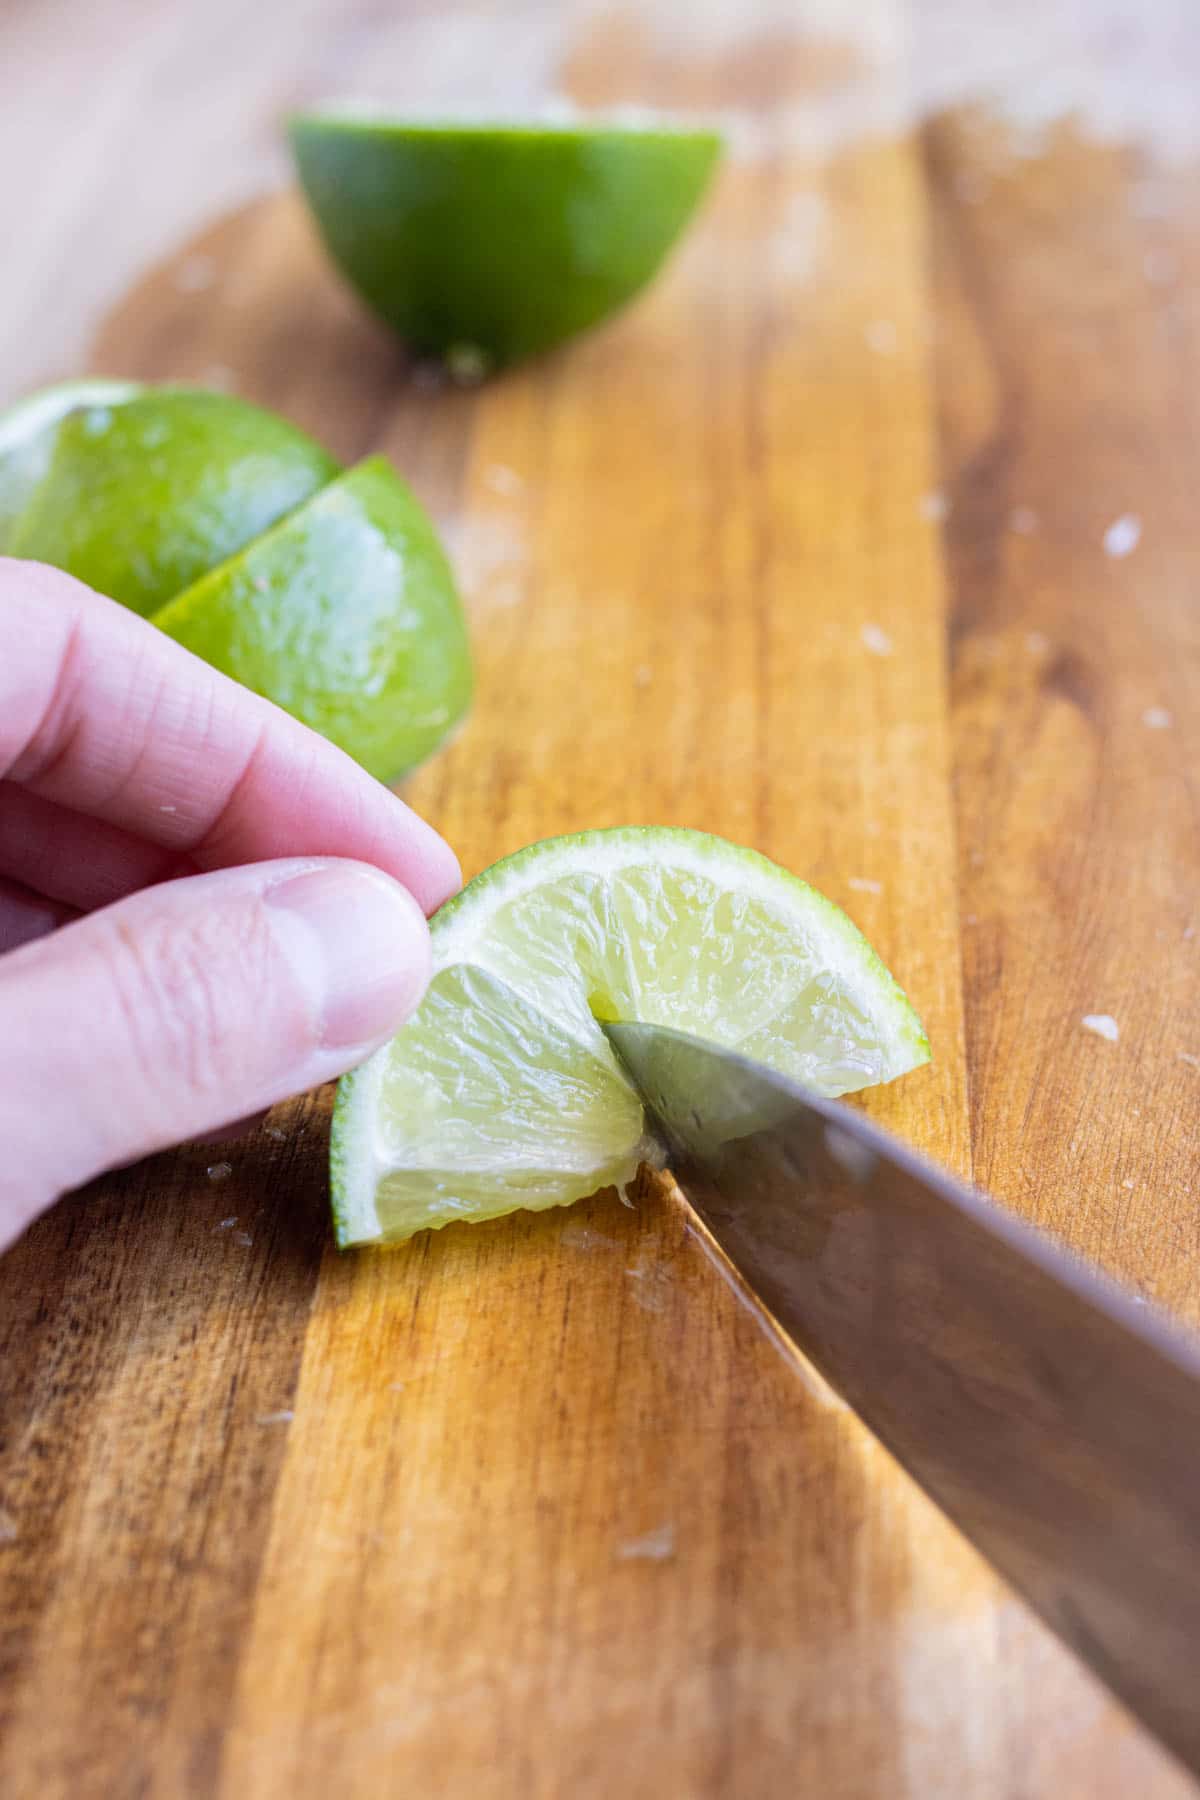 Limes are cut into wedges,